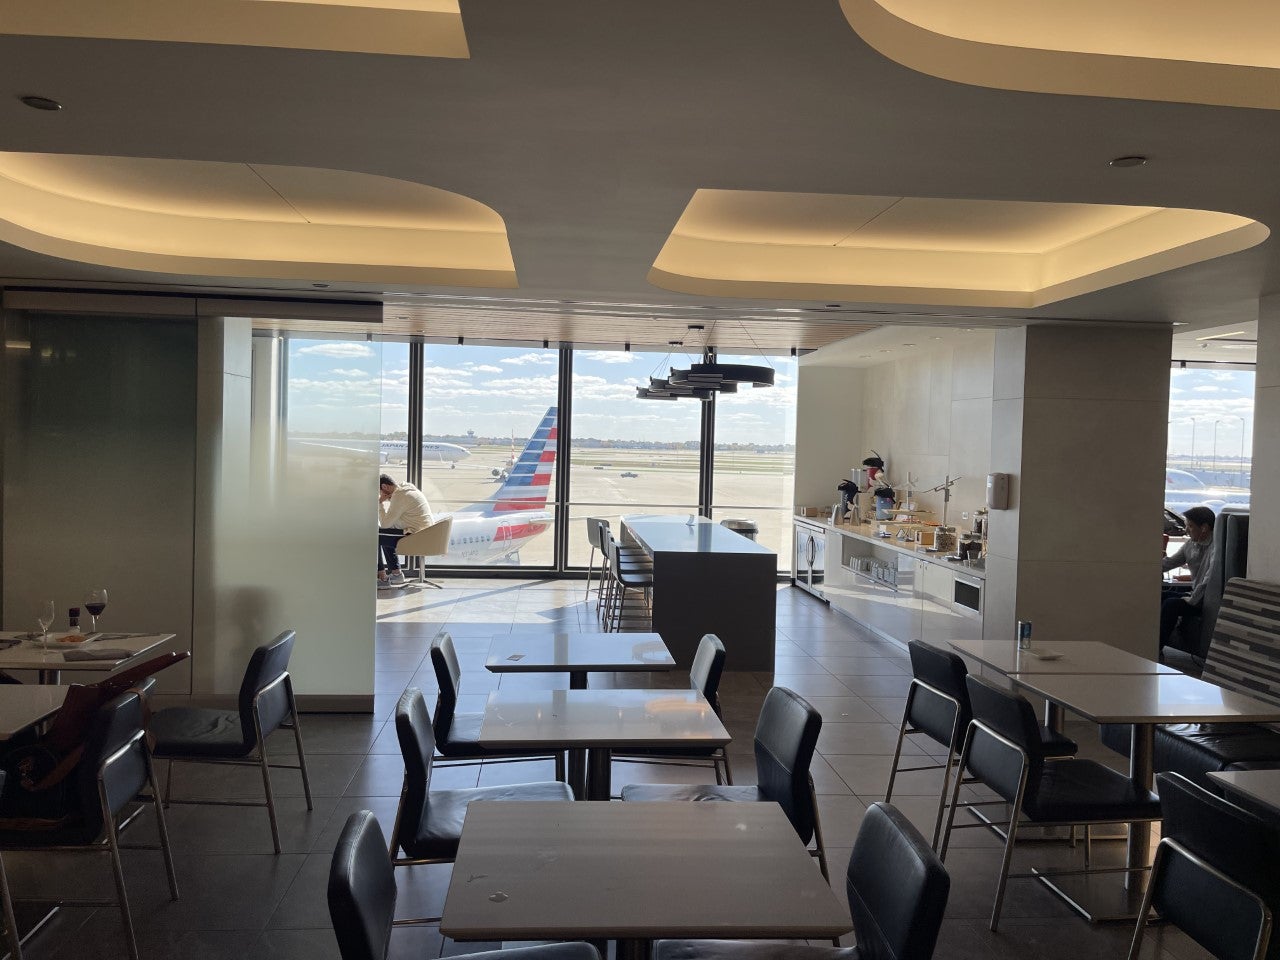 American Airlines Flagship lounge ORD